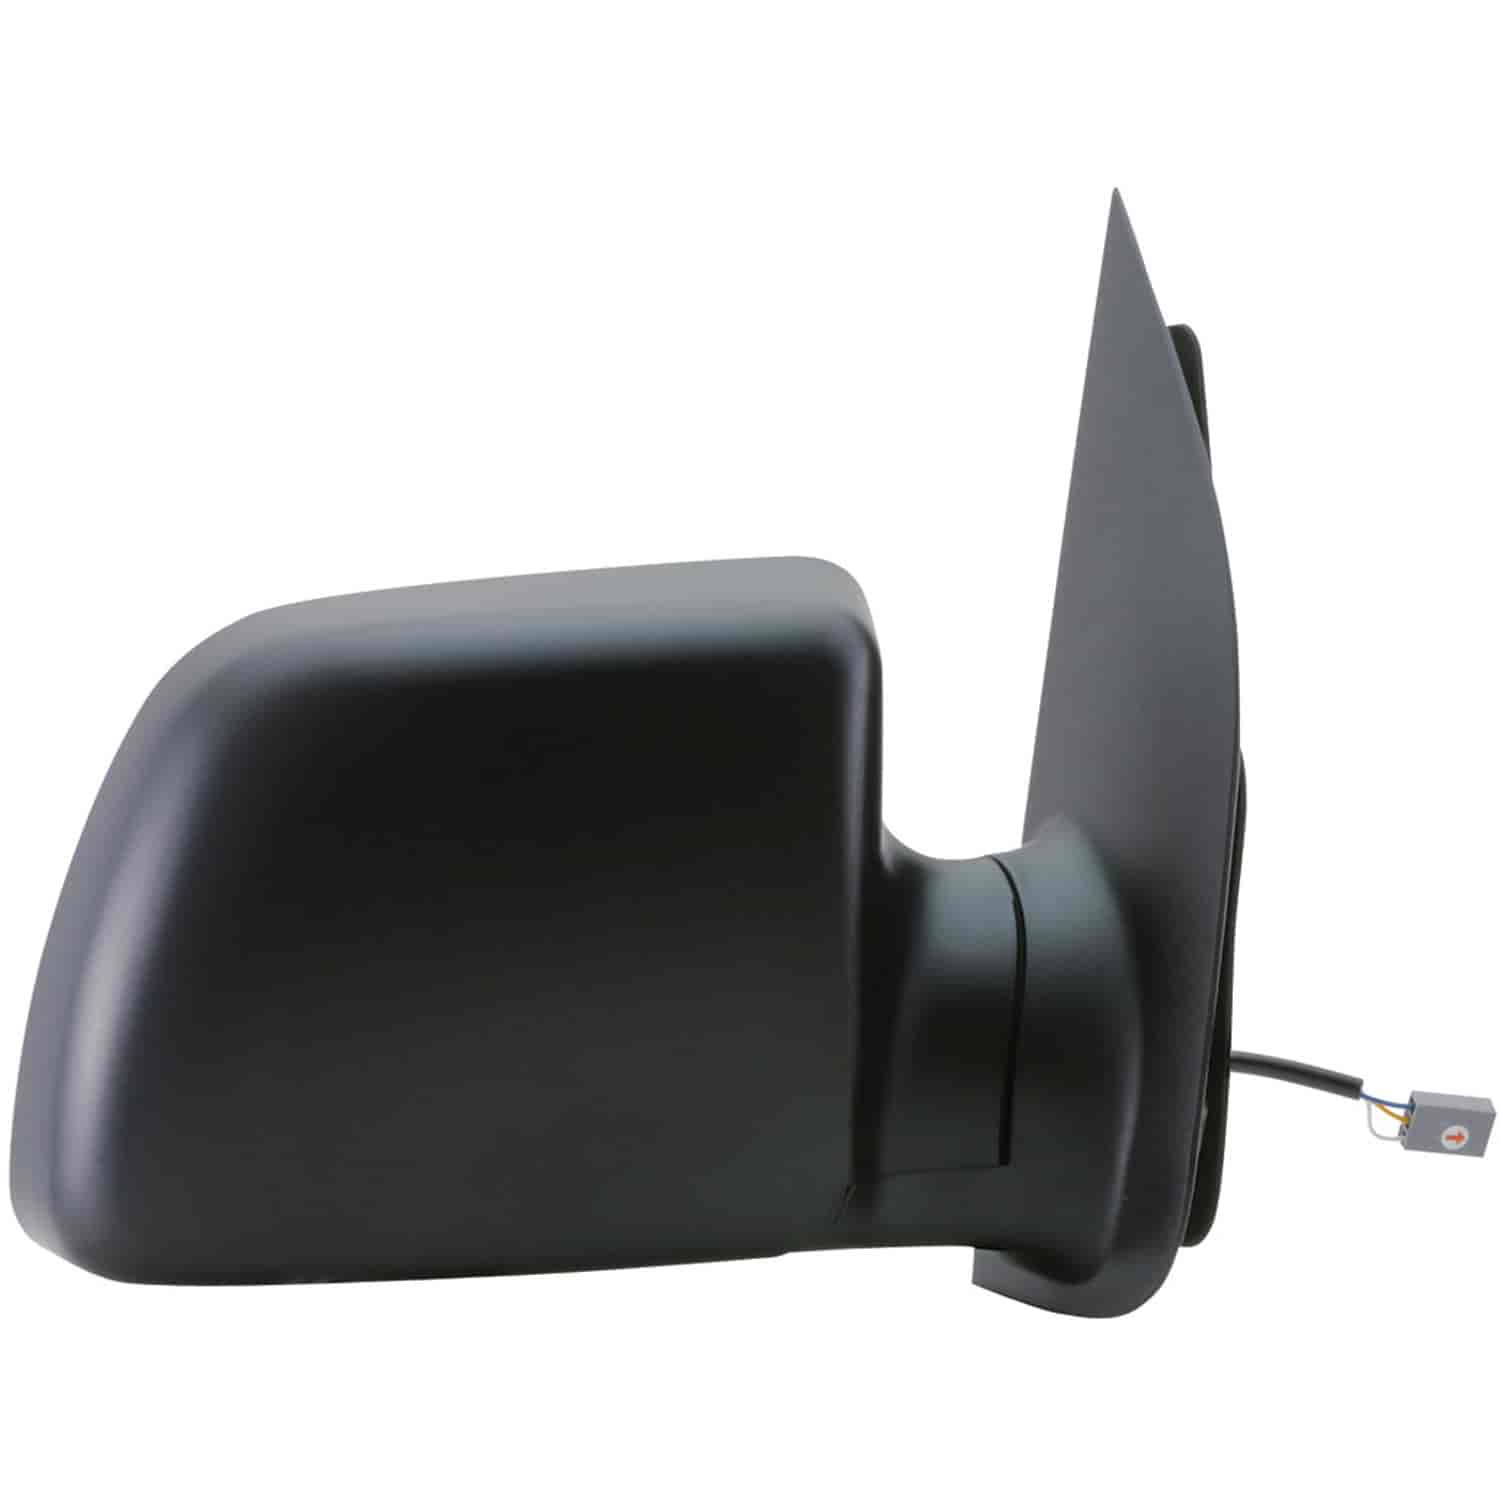 OEM Style Replacement mirror for 94-04 Ford Econoline Van passenger side mirror tested to fit and fu